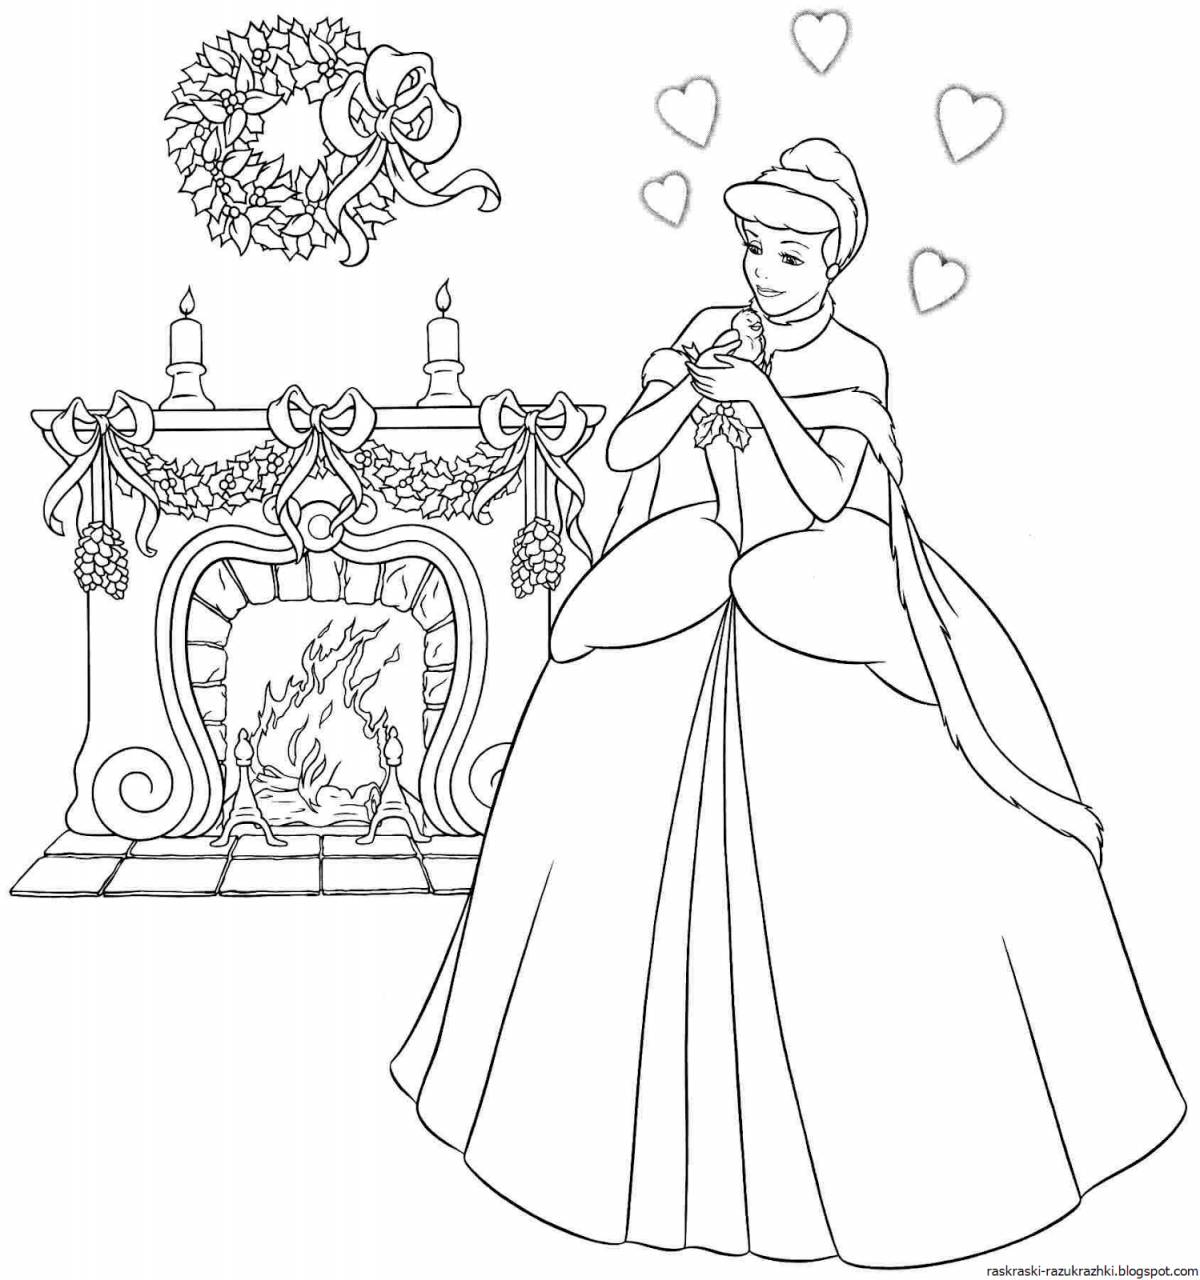 Shiny Cinderella coloring book for kids